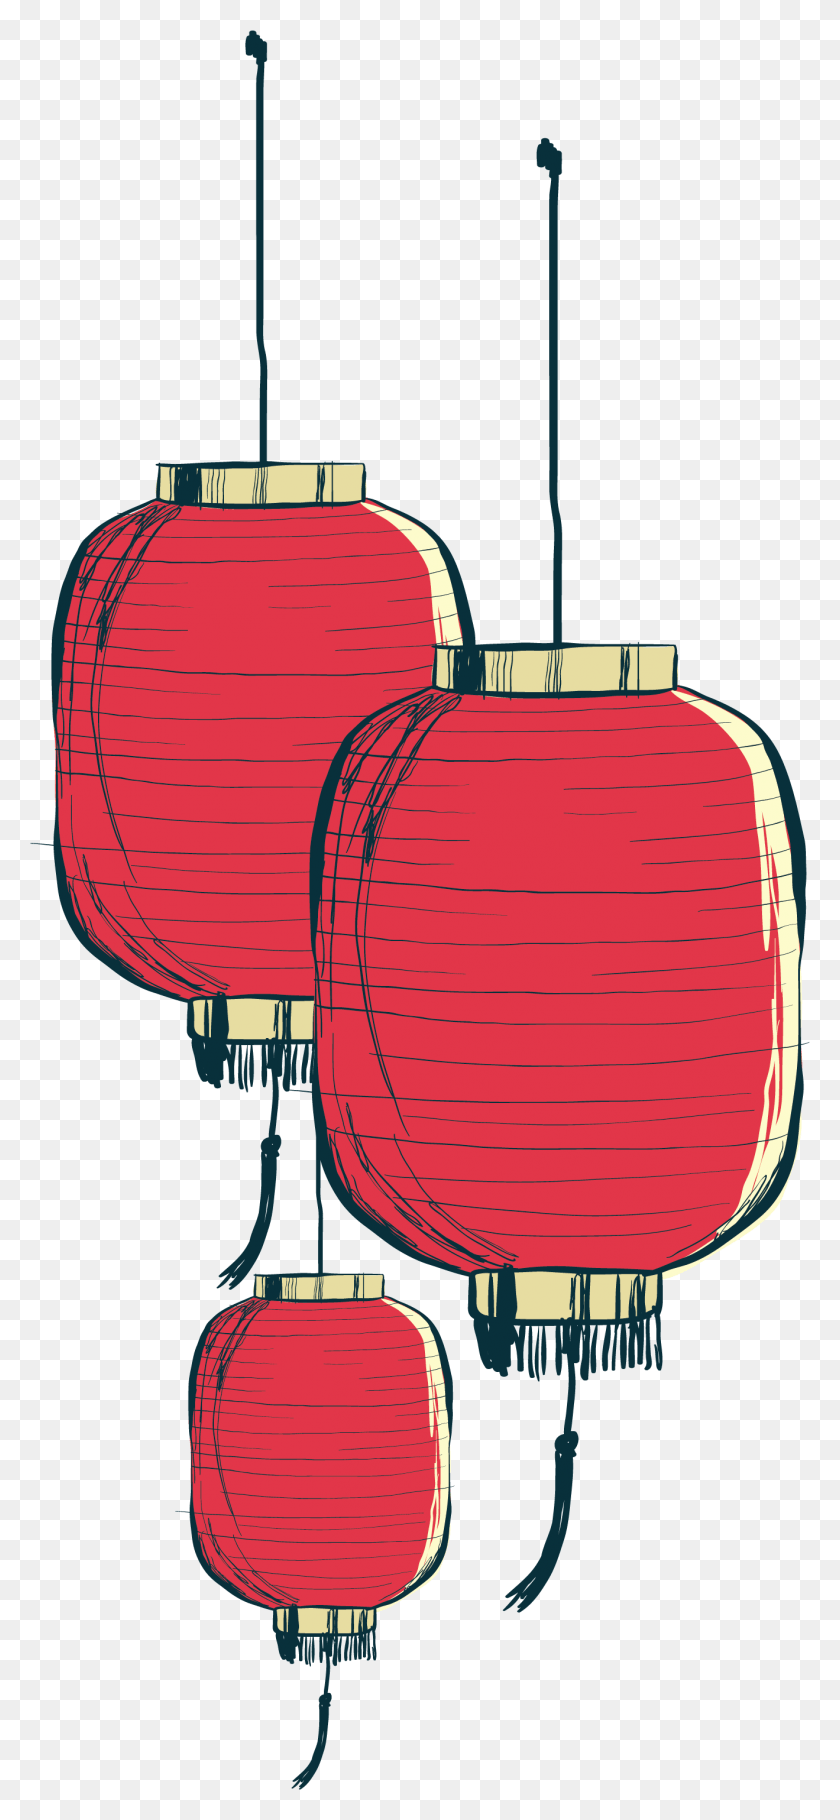 1319x2977 Paper Lantern Painted Chinese Transprent Free Chinese Lantern Vector, Lamp, Lampshade, Label HD PNG Download